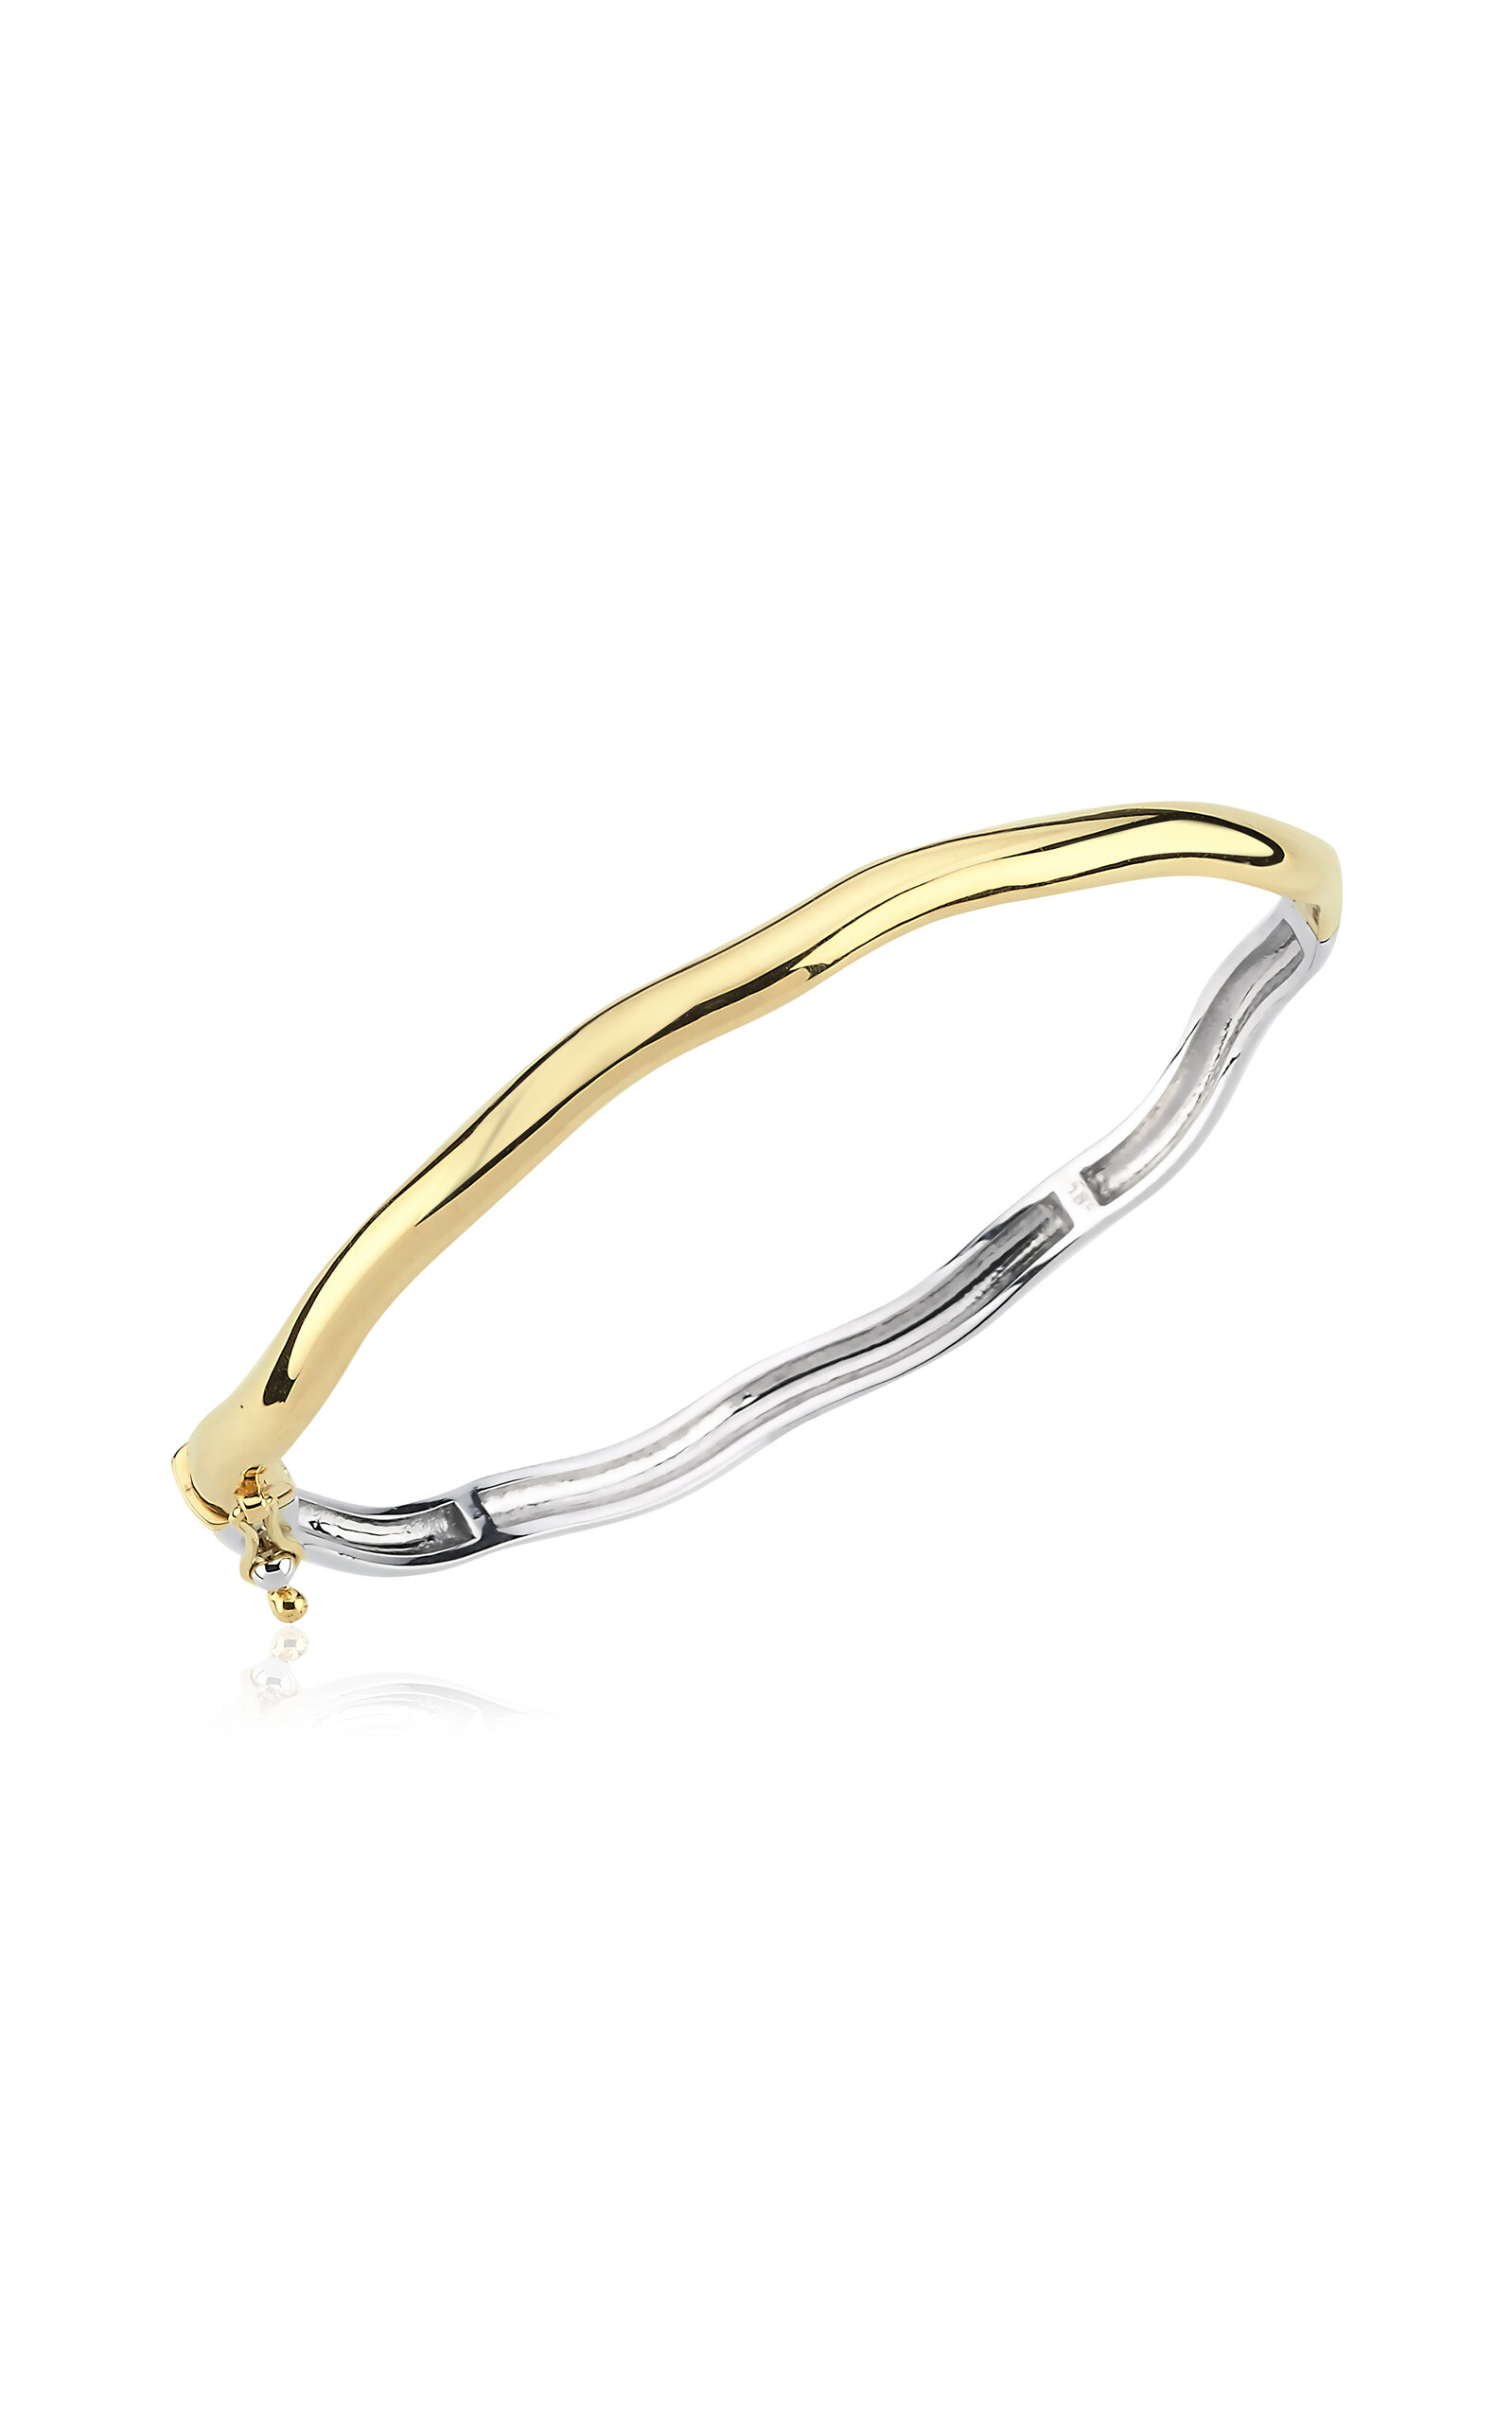 Charms Company Women's Rebellion 14K Yellow and White Gold Bangle